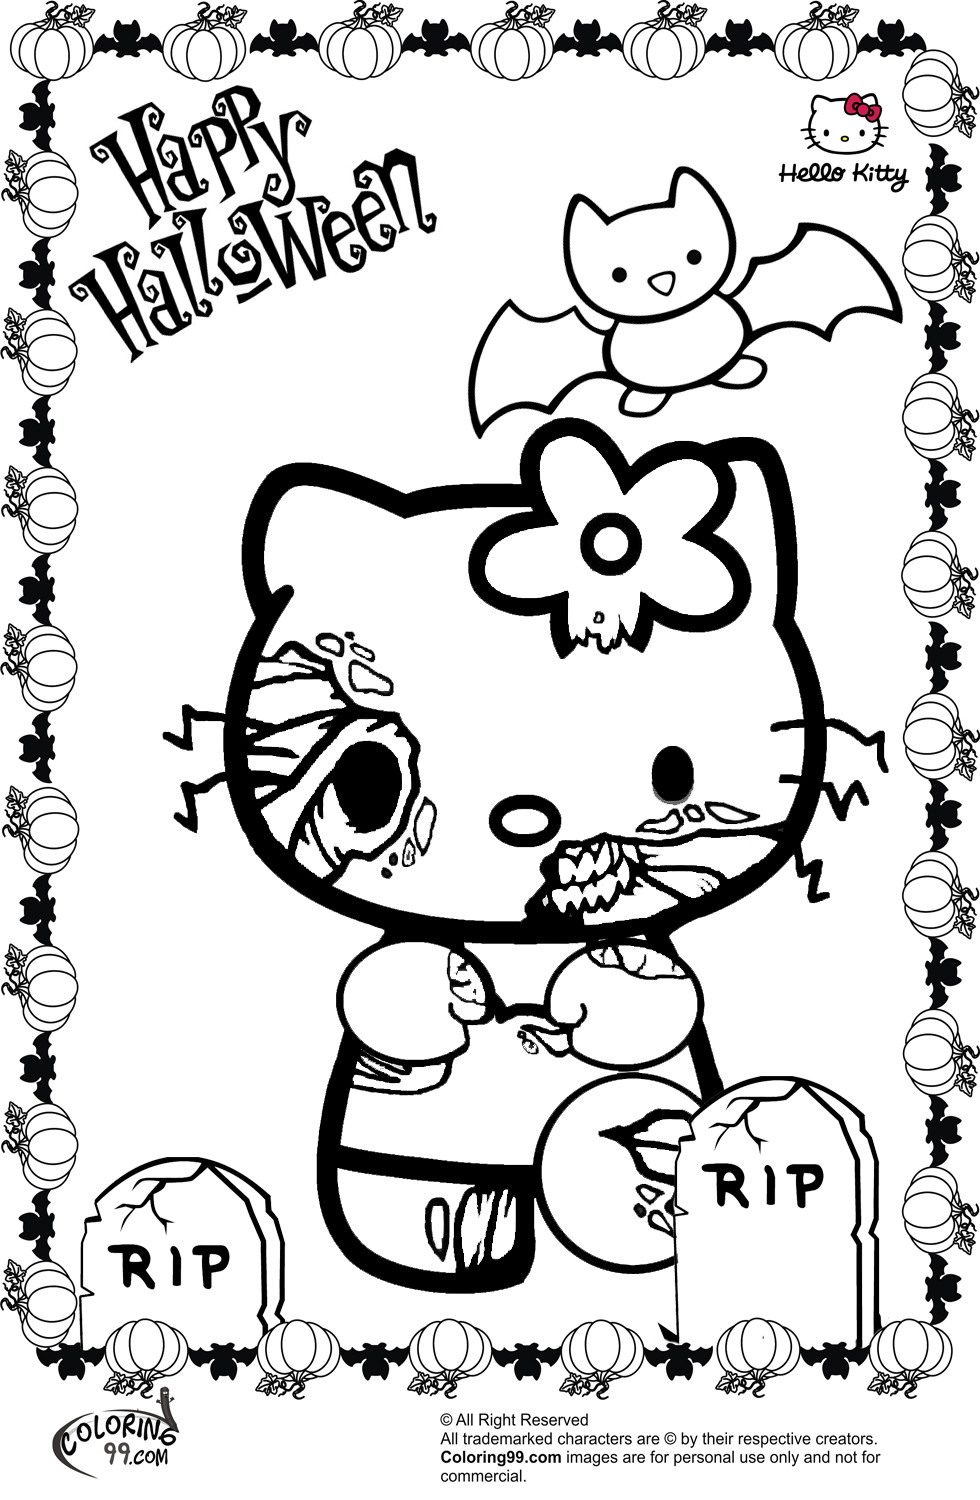 Halloween Coloring Pages For Teens
 Disney Zombie Coloring Pages For Adults And Teens grig3